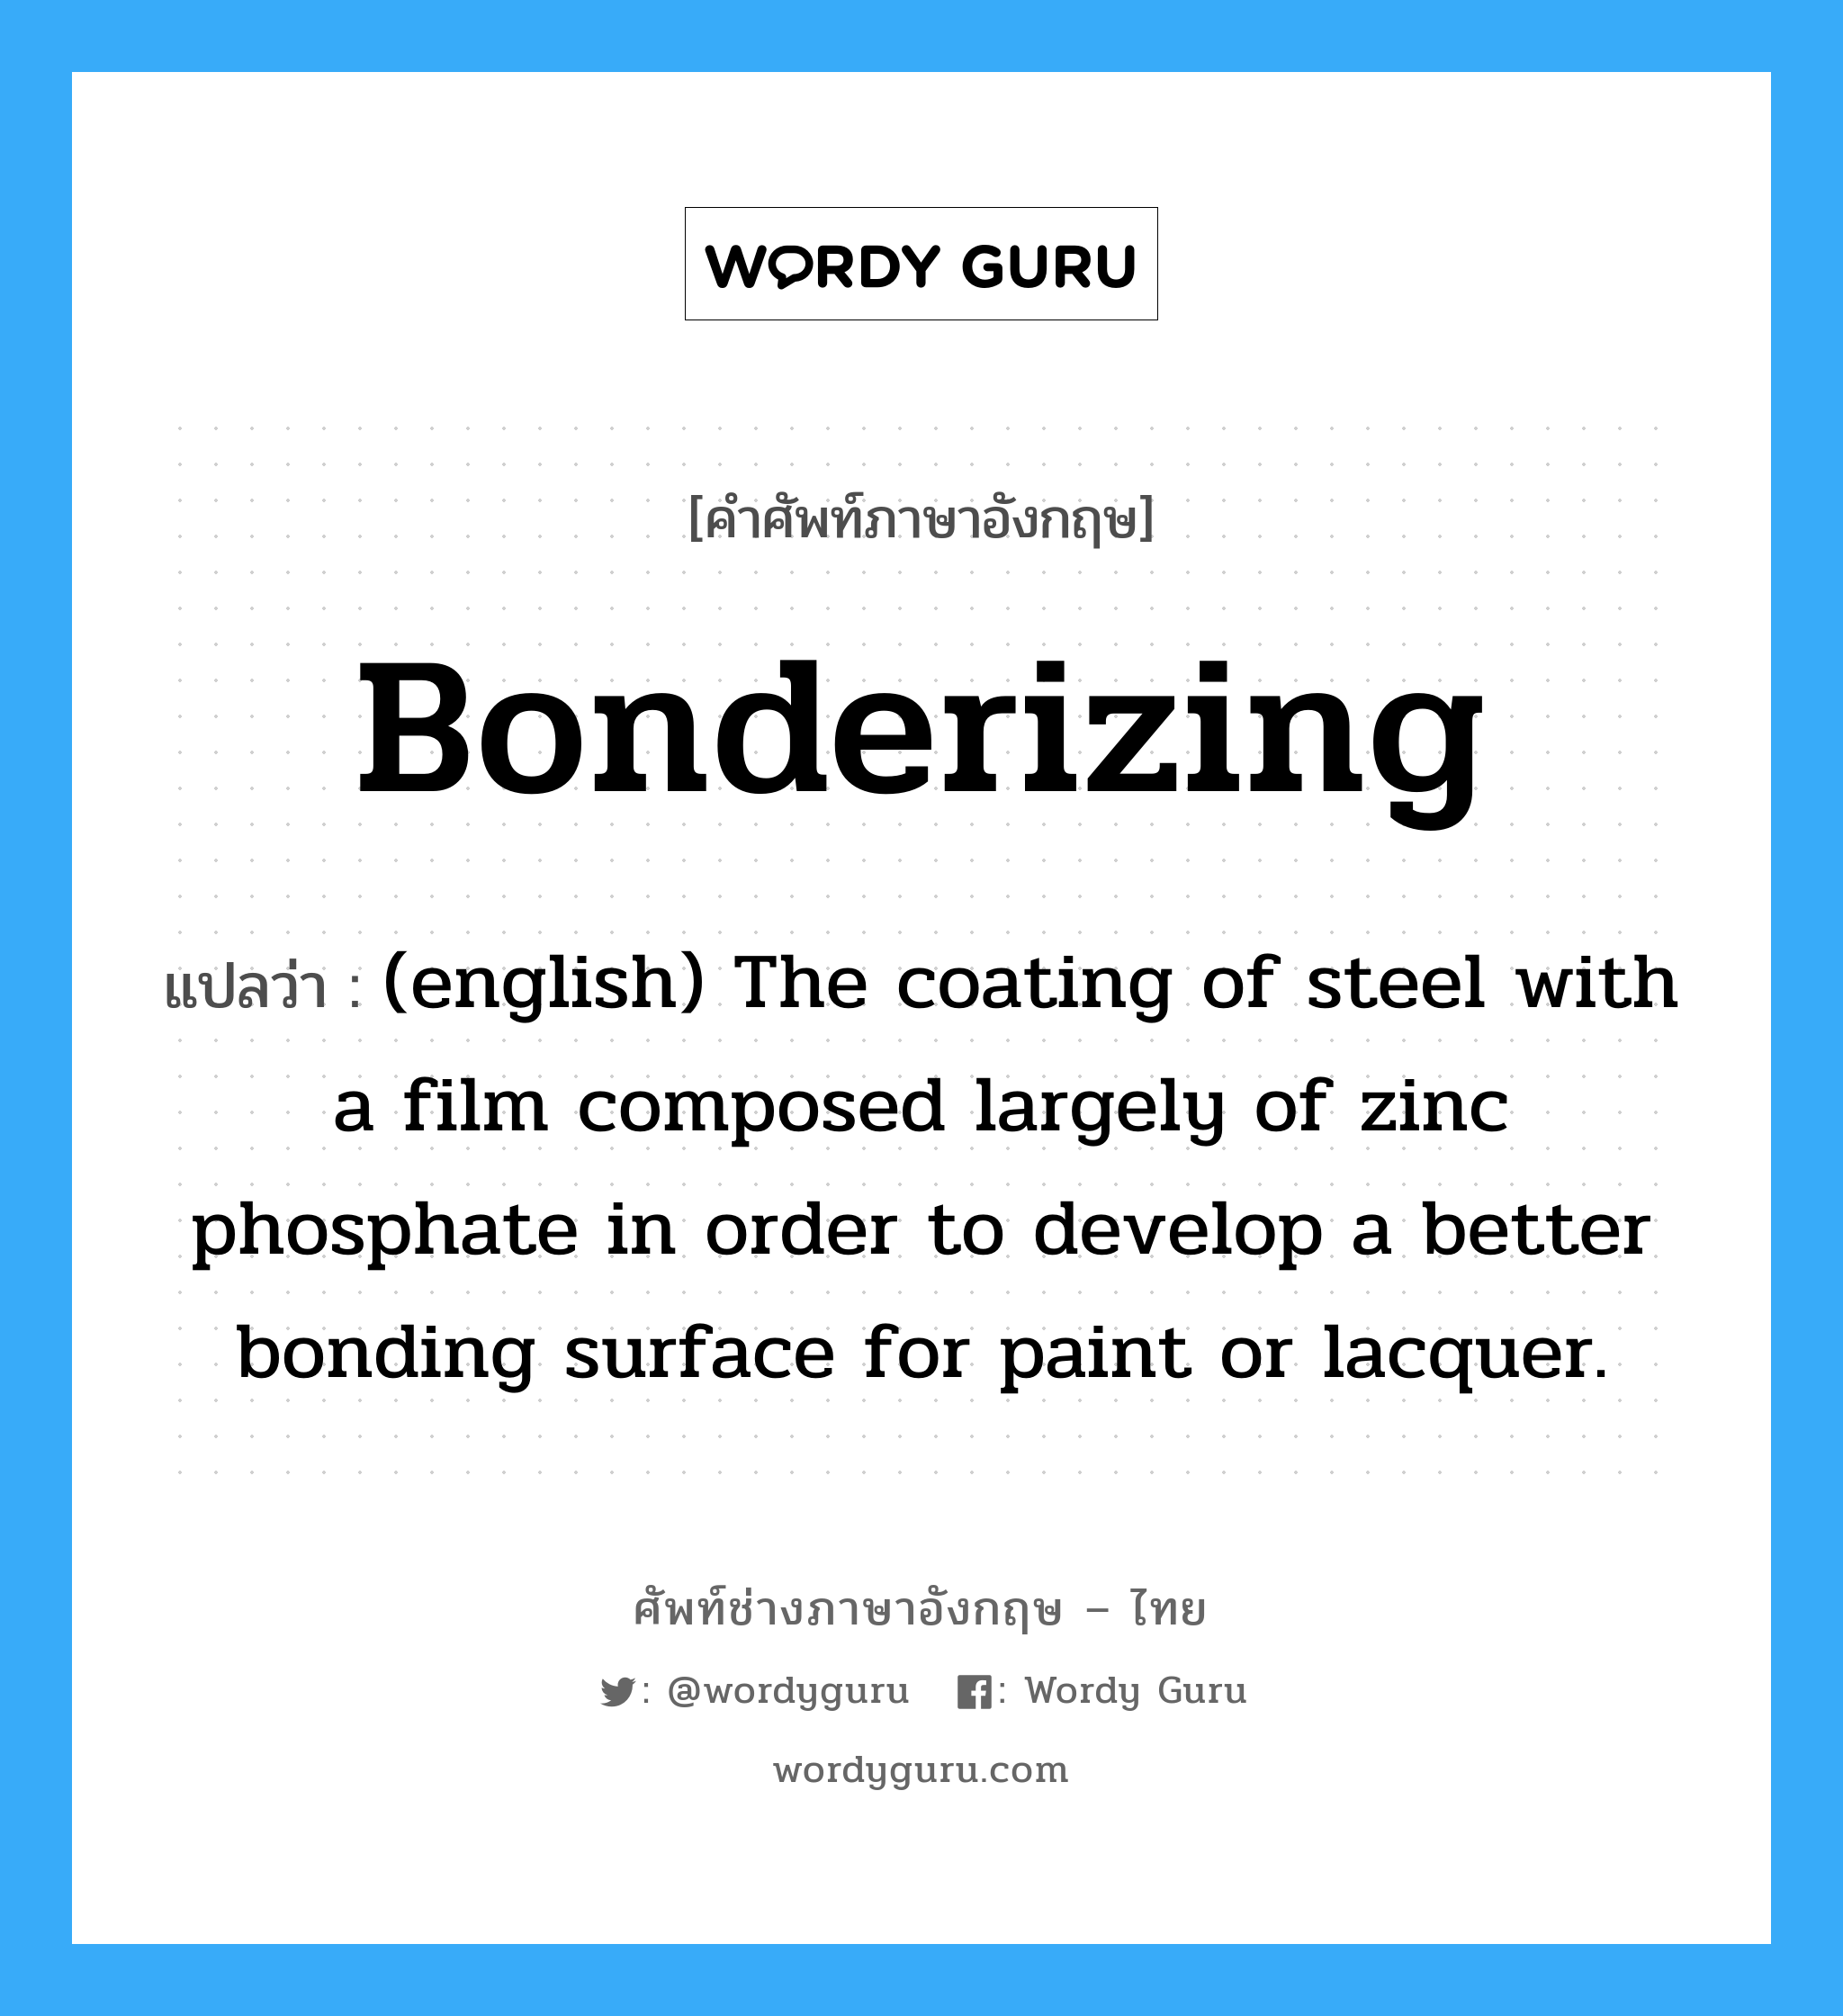 Bonderizing แปลว่า?, คำศัพท์ช่างภาษาอังกฤษ - ไทย Bonderizing คำศัพท์ภาษาอังกฤษ Bonderizing แปลว่า (english) The coating of steel with a film composed largely of zinc phosphate in order to develop a better bonding surface for paint or lacquer.